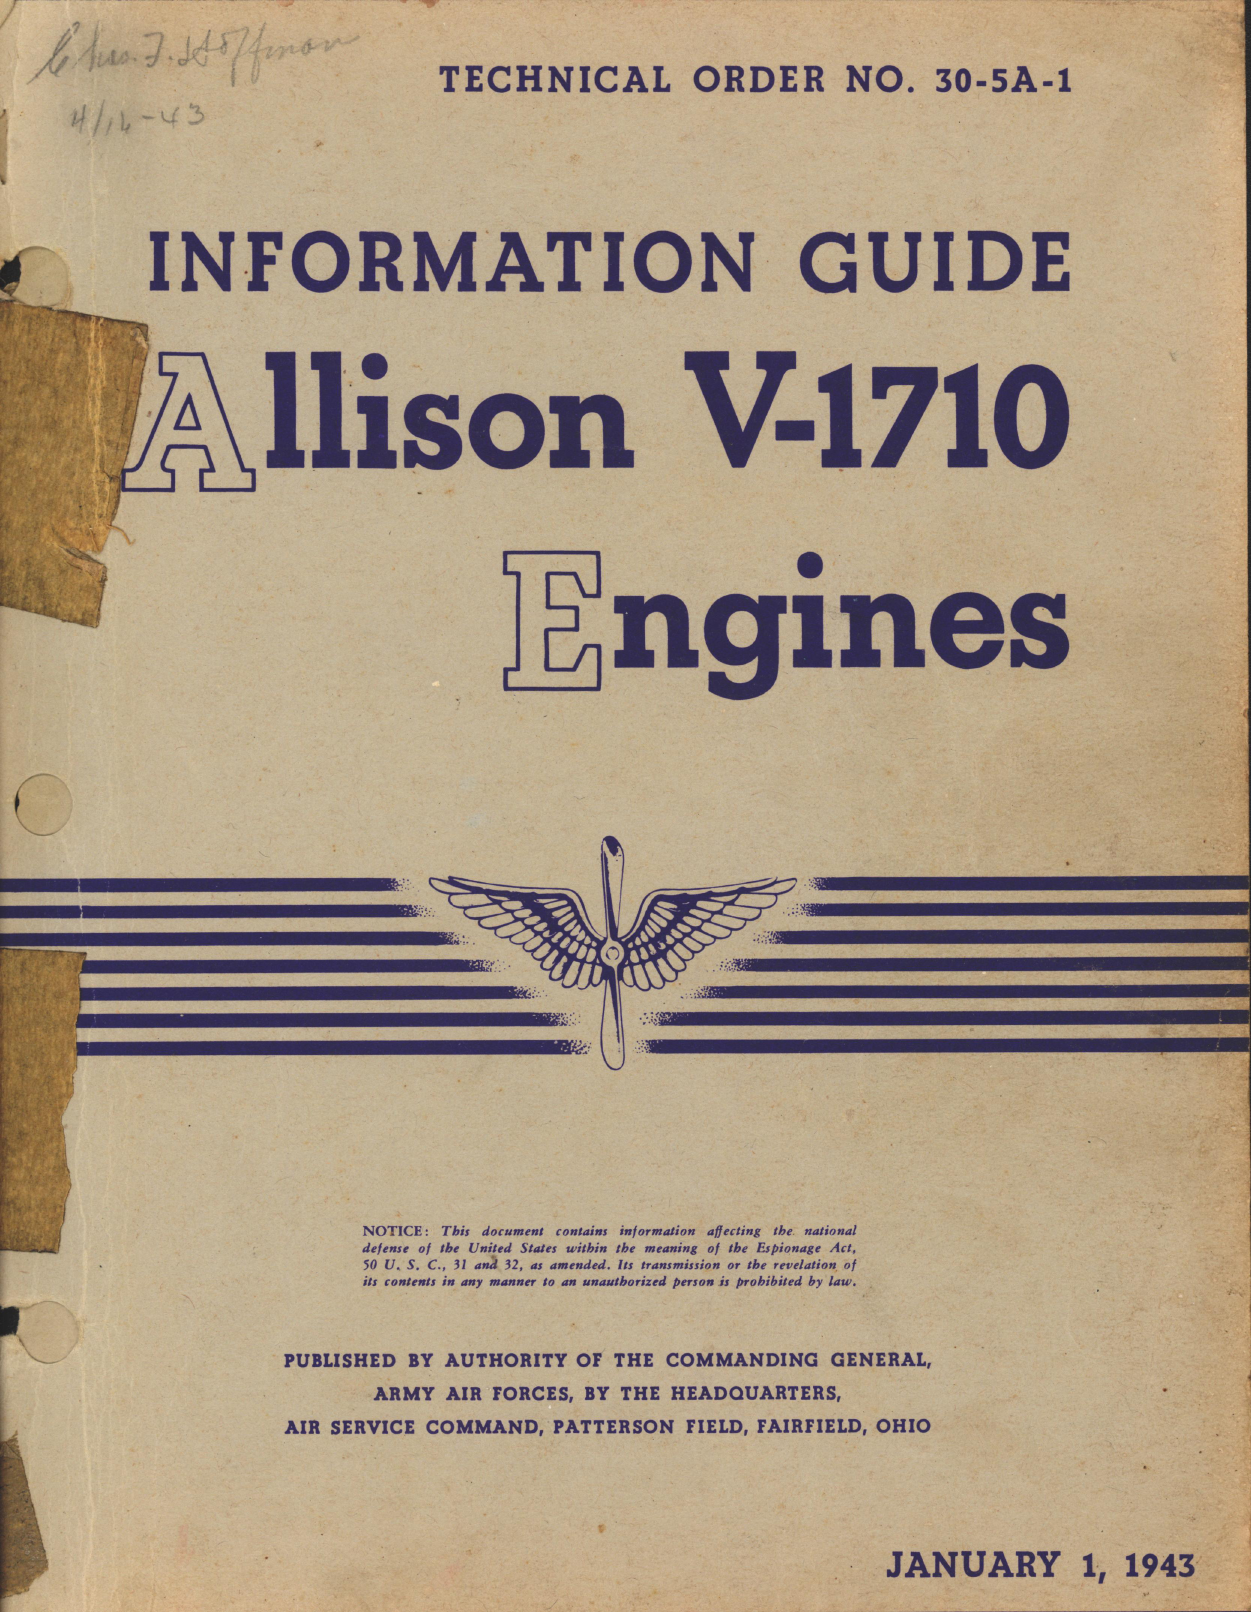 Sample page 1 from AirCorps Library document: Information Guide for Allison V-1710 E and F Engines